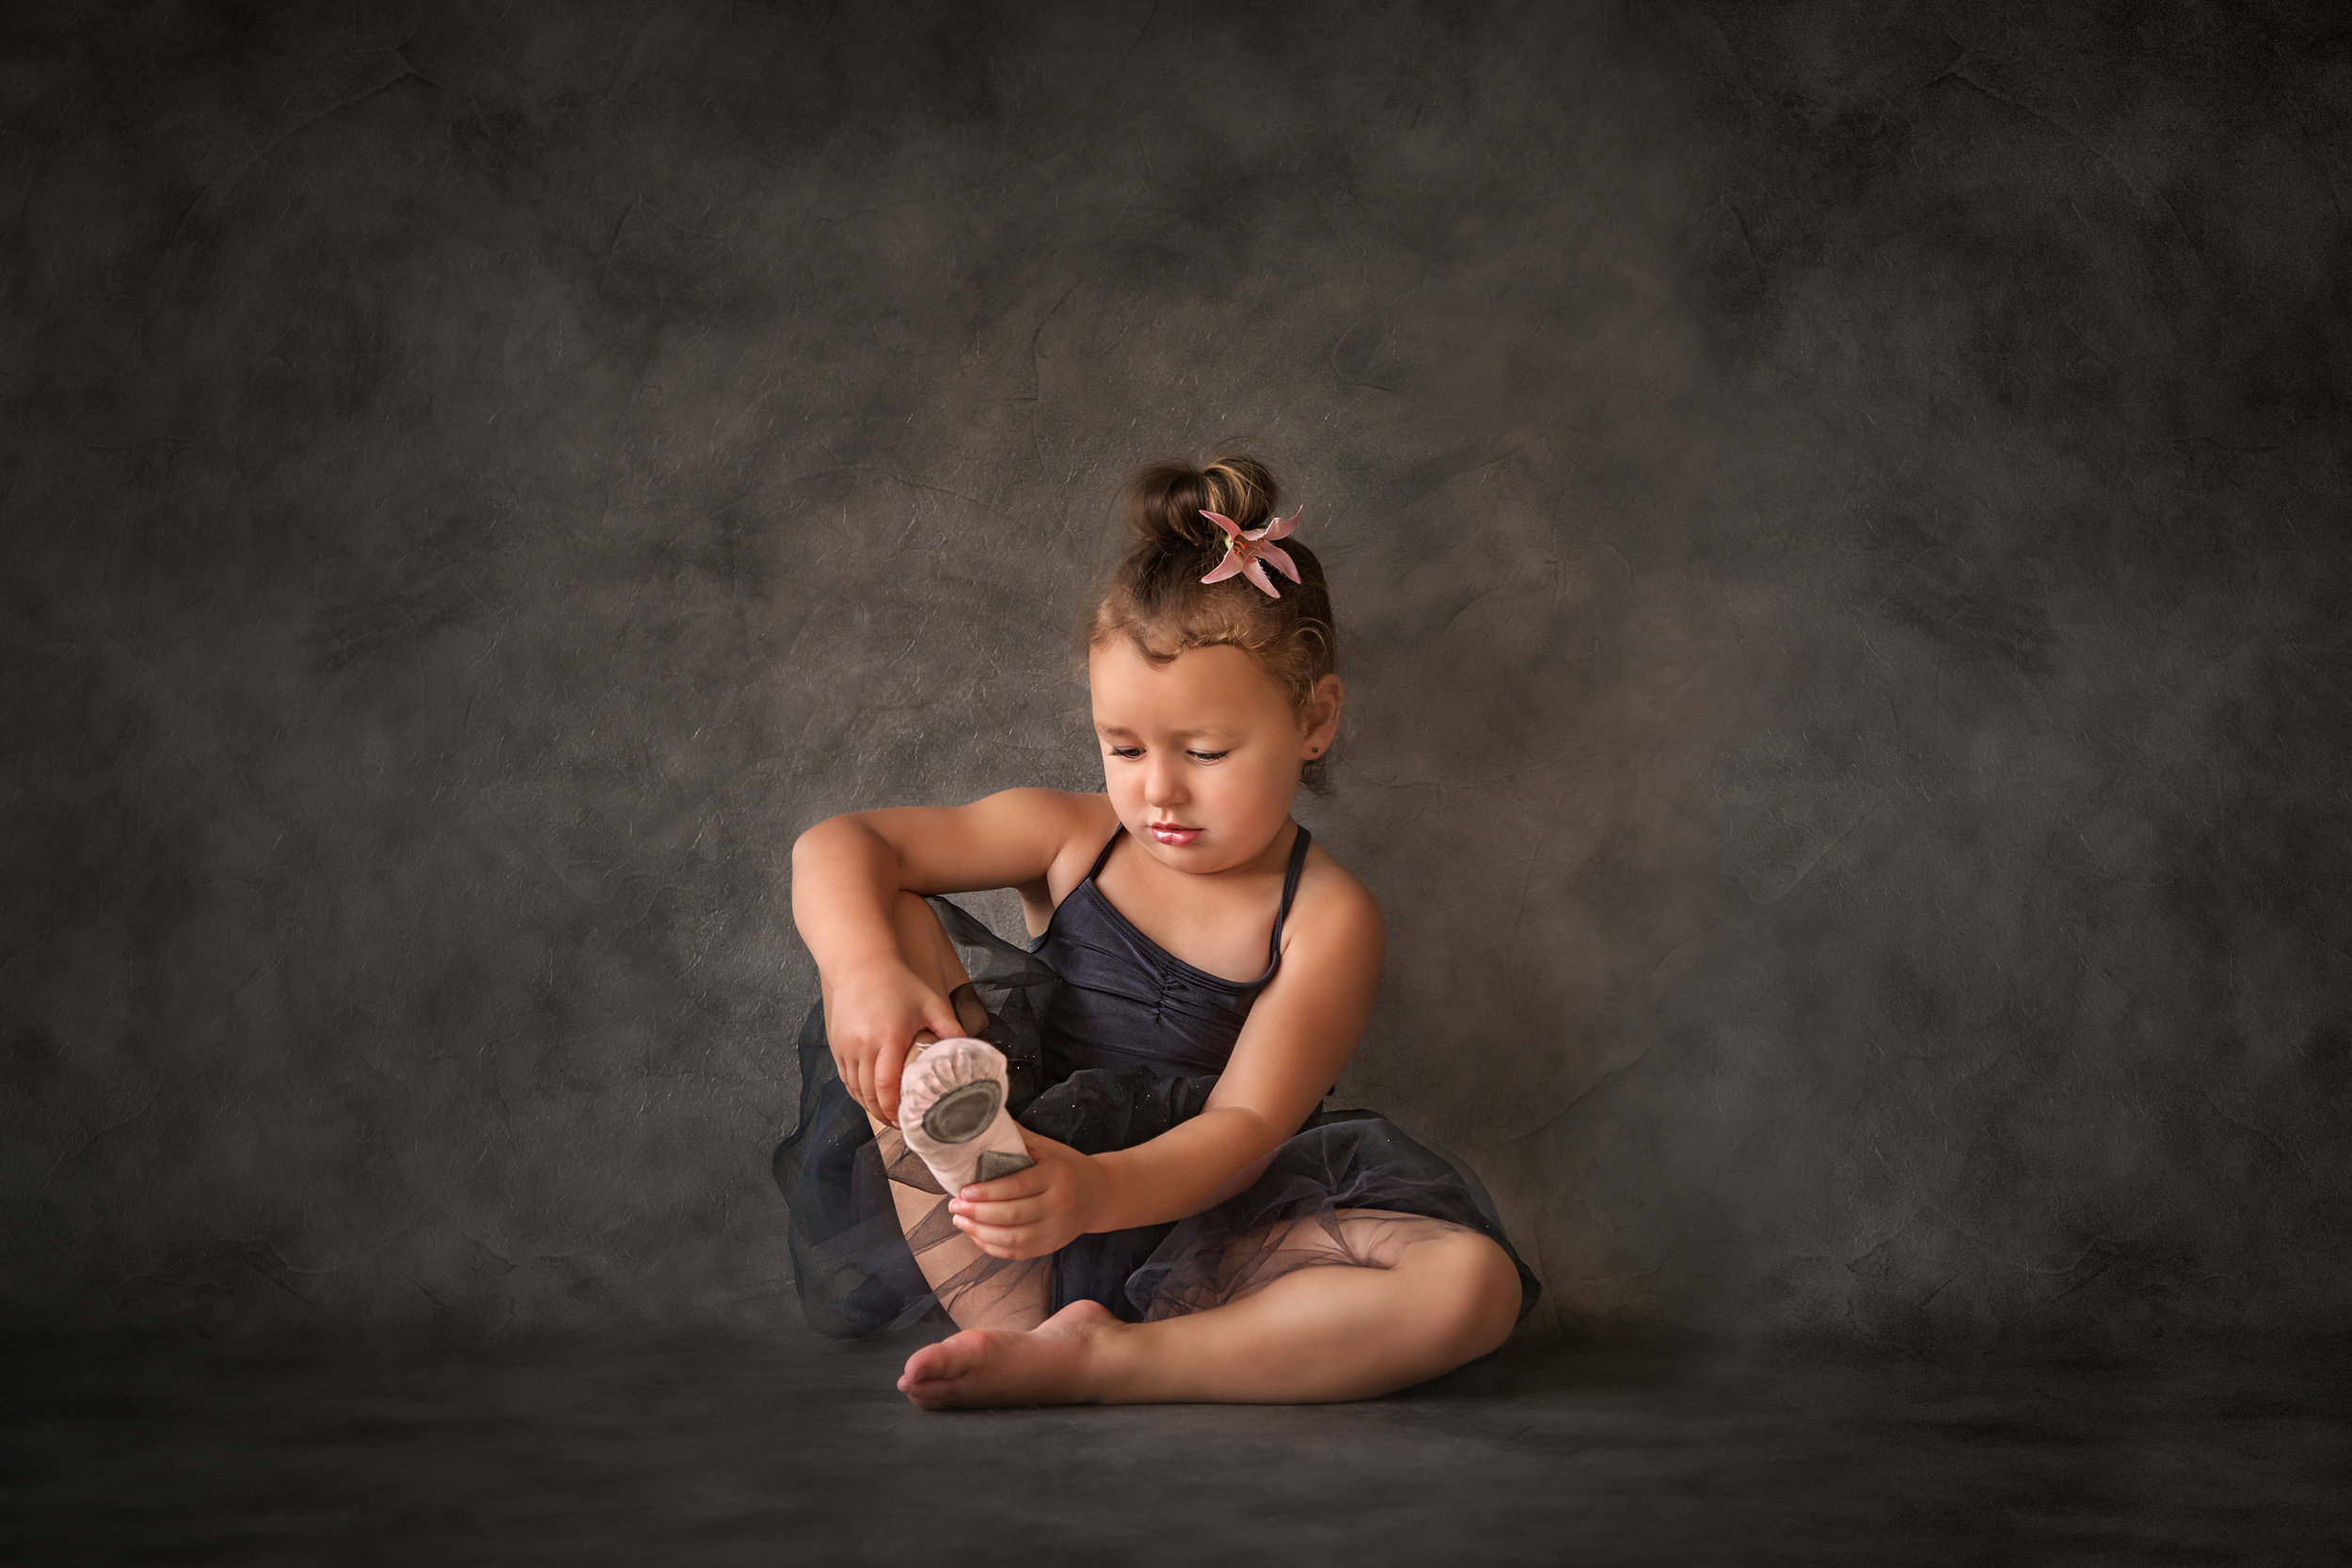 Little Ballerina, Helen Wilkin FPSNZ, George Chance Colour Print trophy and PSNZ Gold Medal for Best Colour Print